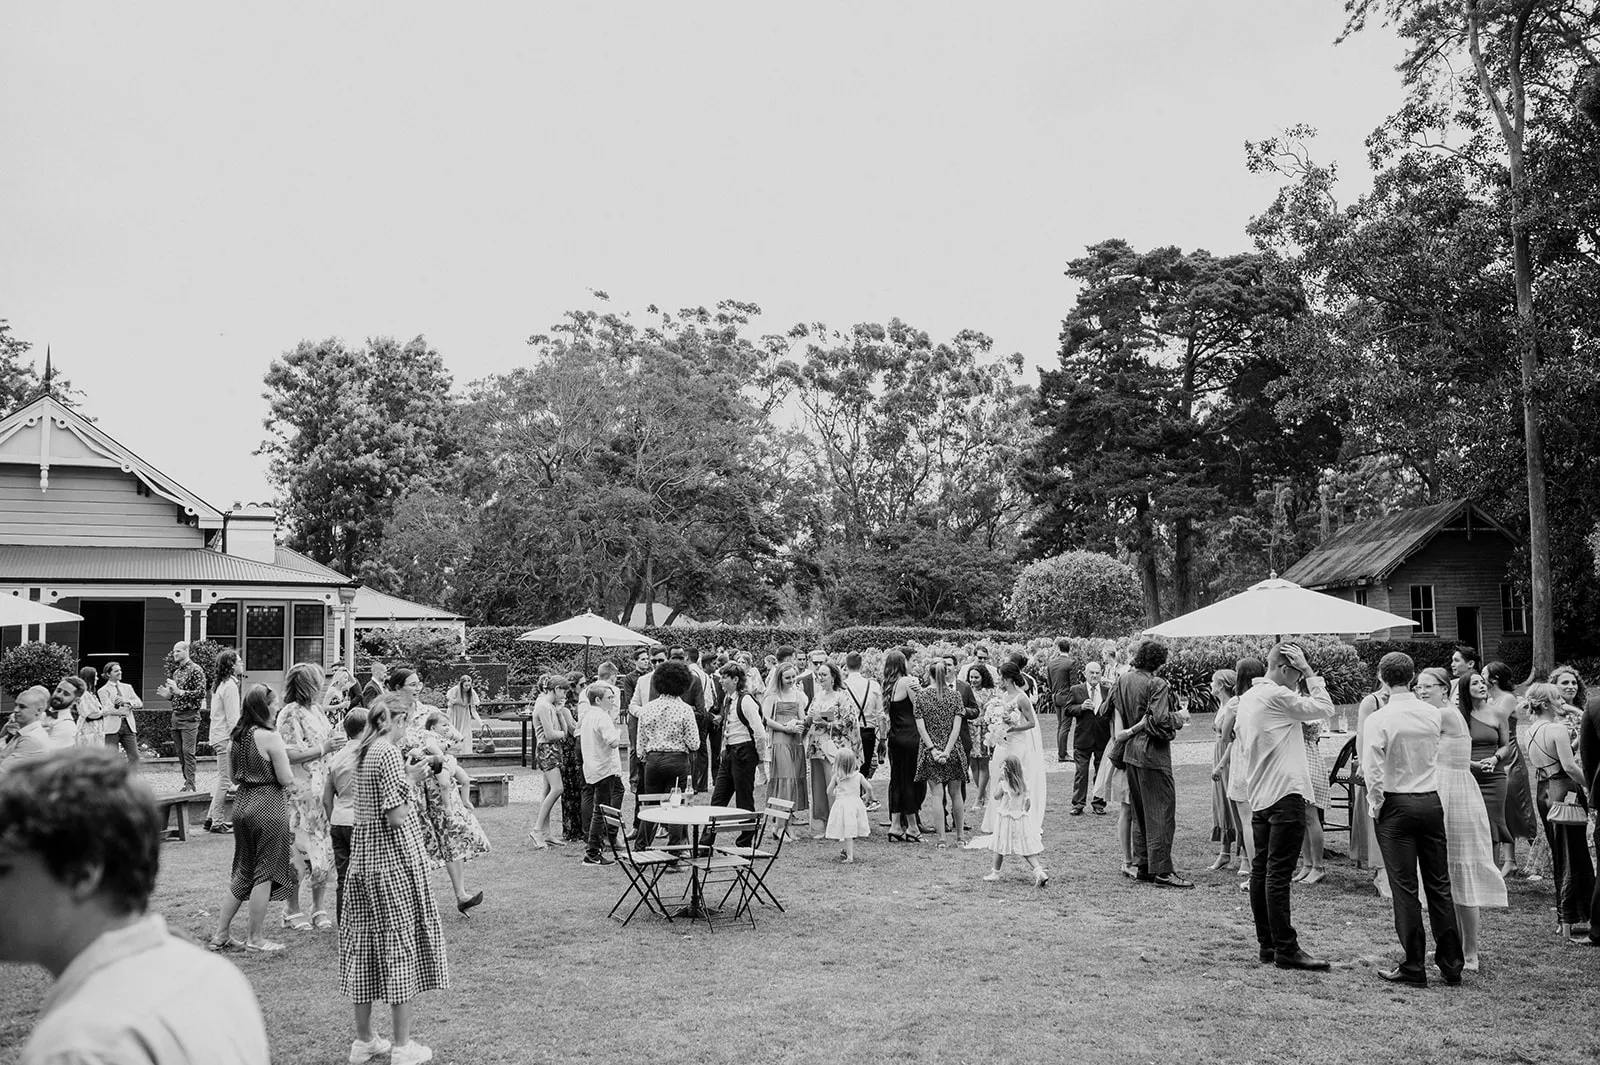 Black and white photo of an outdoor gathering in a garden. People of various ages are standing and interacting near small tables and chairs. Trees and a house are visible in the background. Some attendees are holding glasses, possibly at a celebratory event.